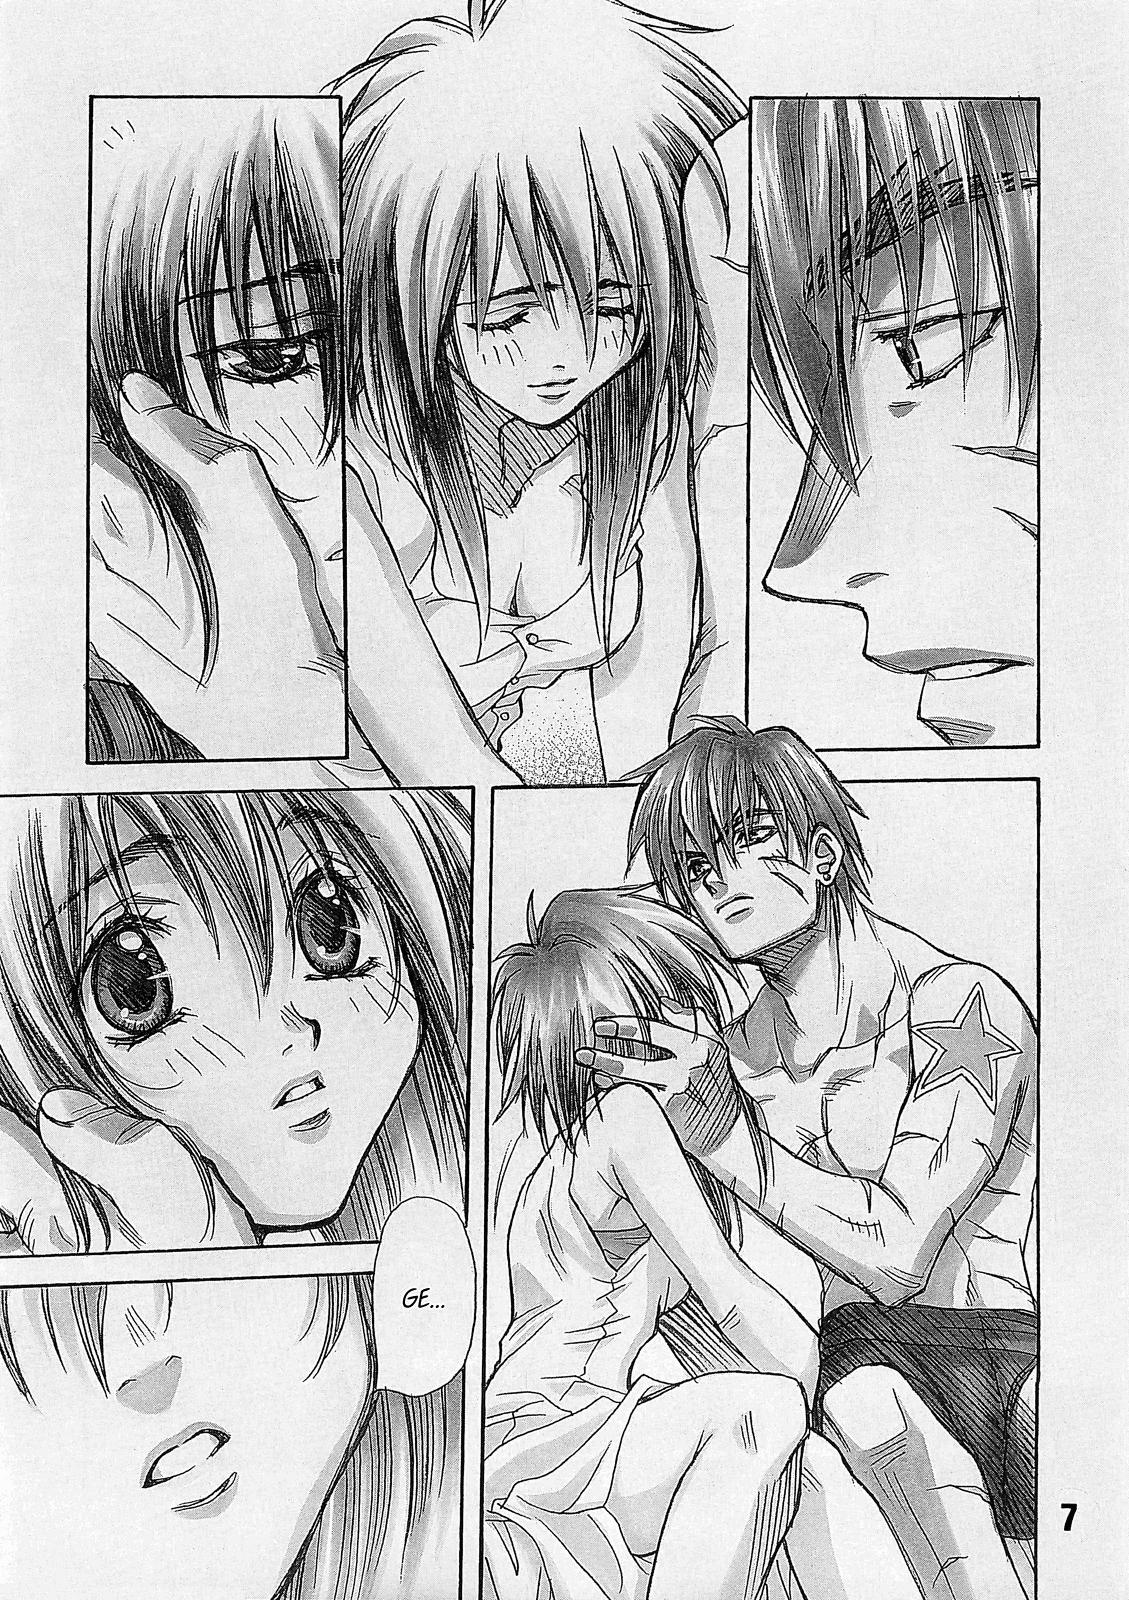 Titty Fuck NOSTALGIC - Outlaw star Kissing - Page 7